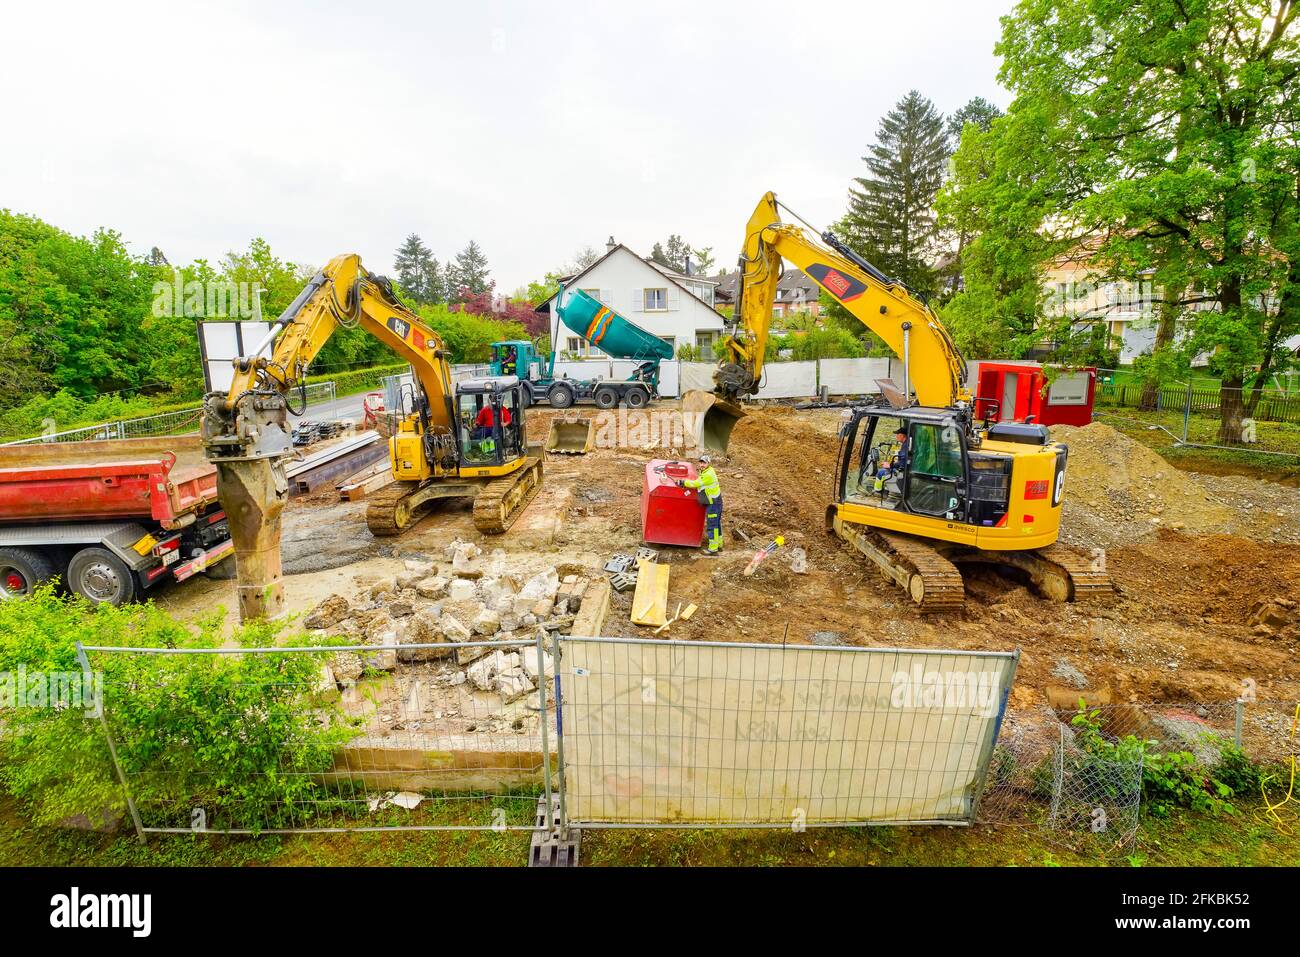 Destruction of the old house in order to build a new one. Heavy bulldozer tearing down a villa and frees up space for a new building. Riehen, Switzerl Stock Photo